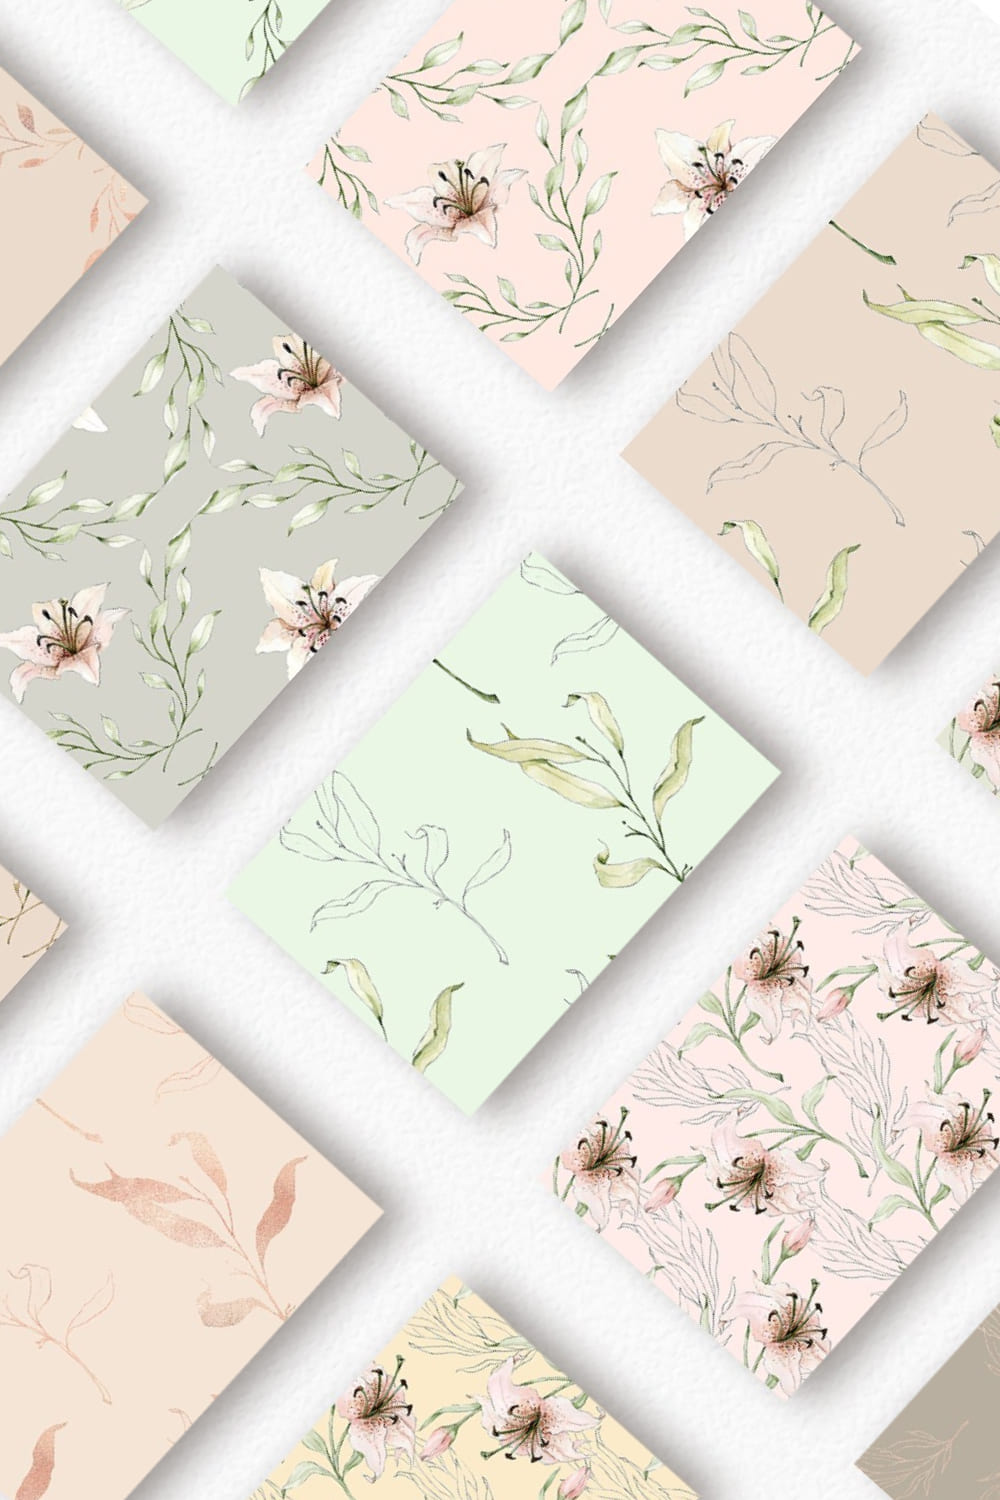 Diverse of floral patterns for your visual content.